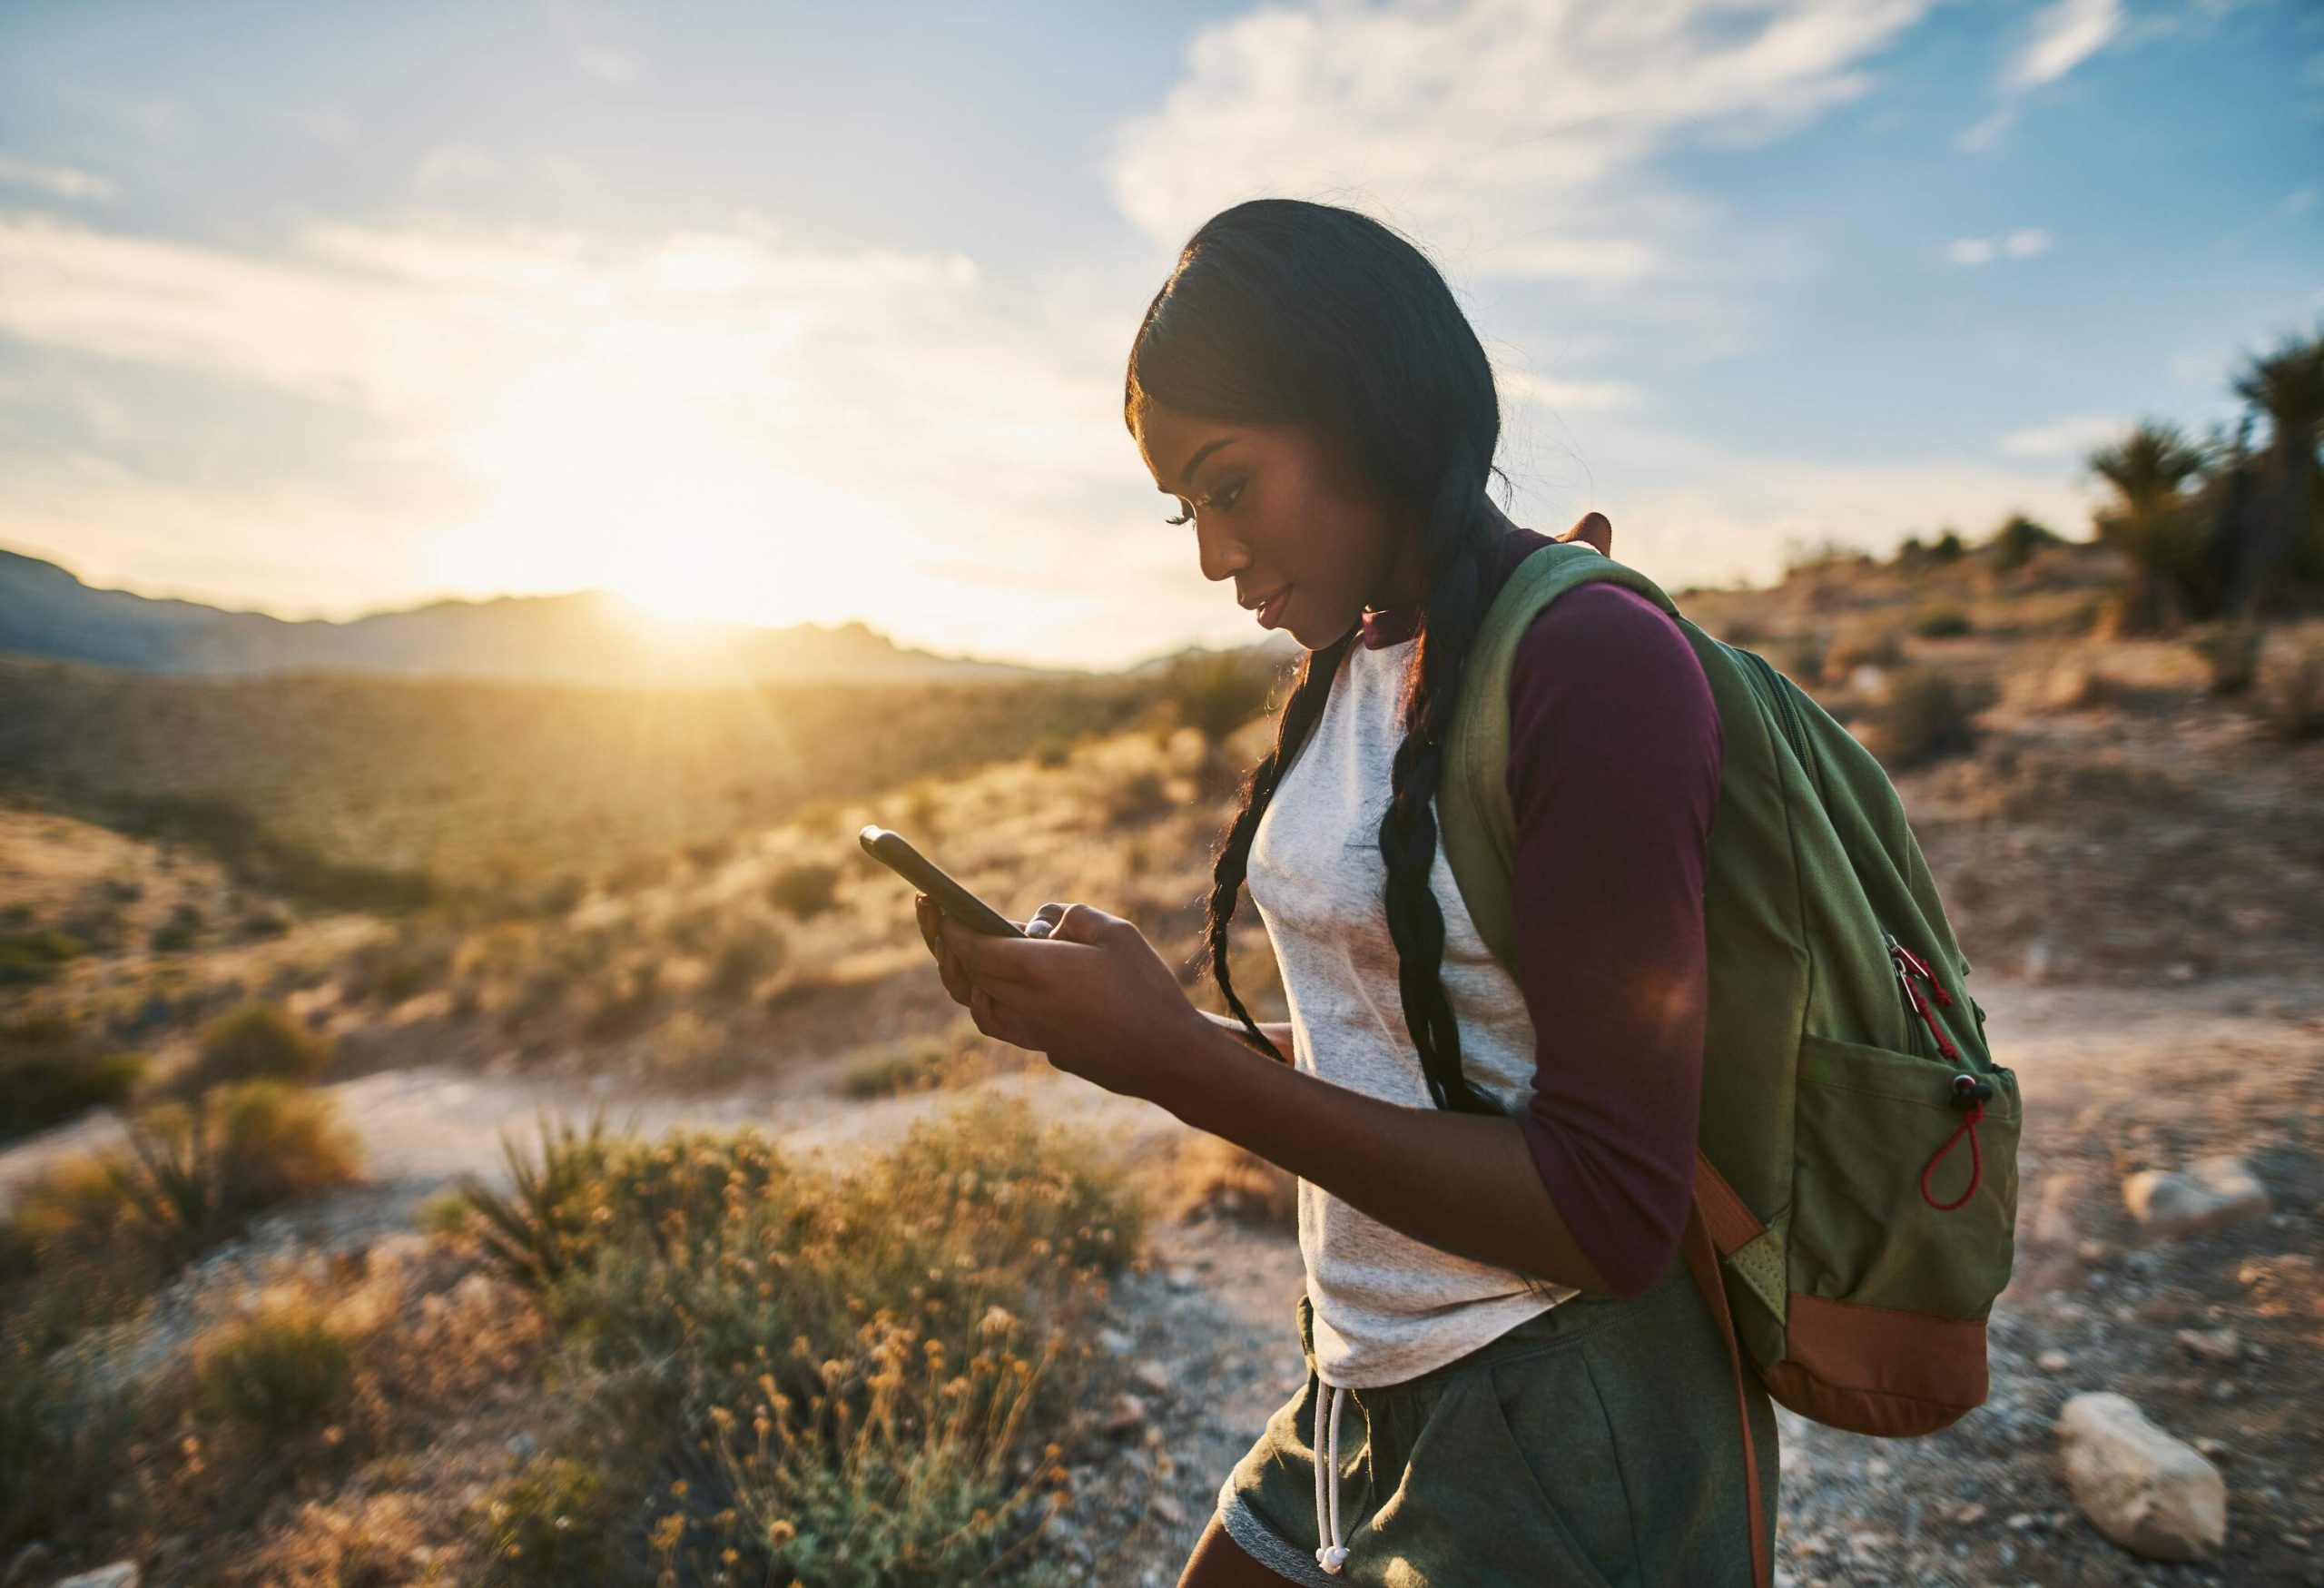 A woman with a green backpack looking at her mobile phone.